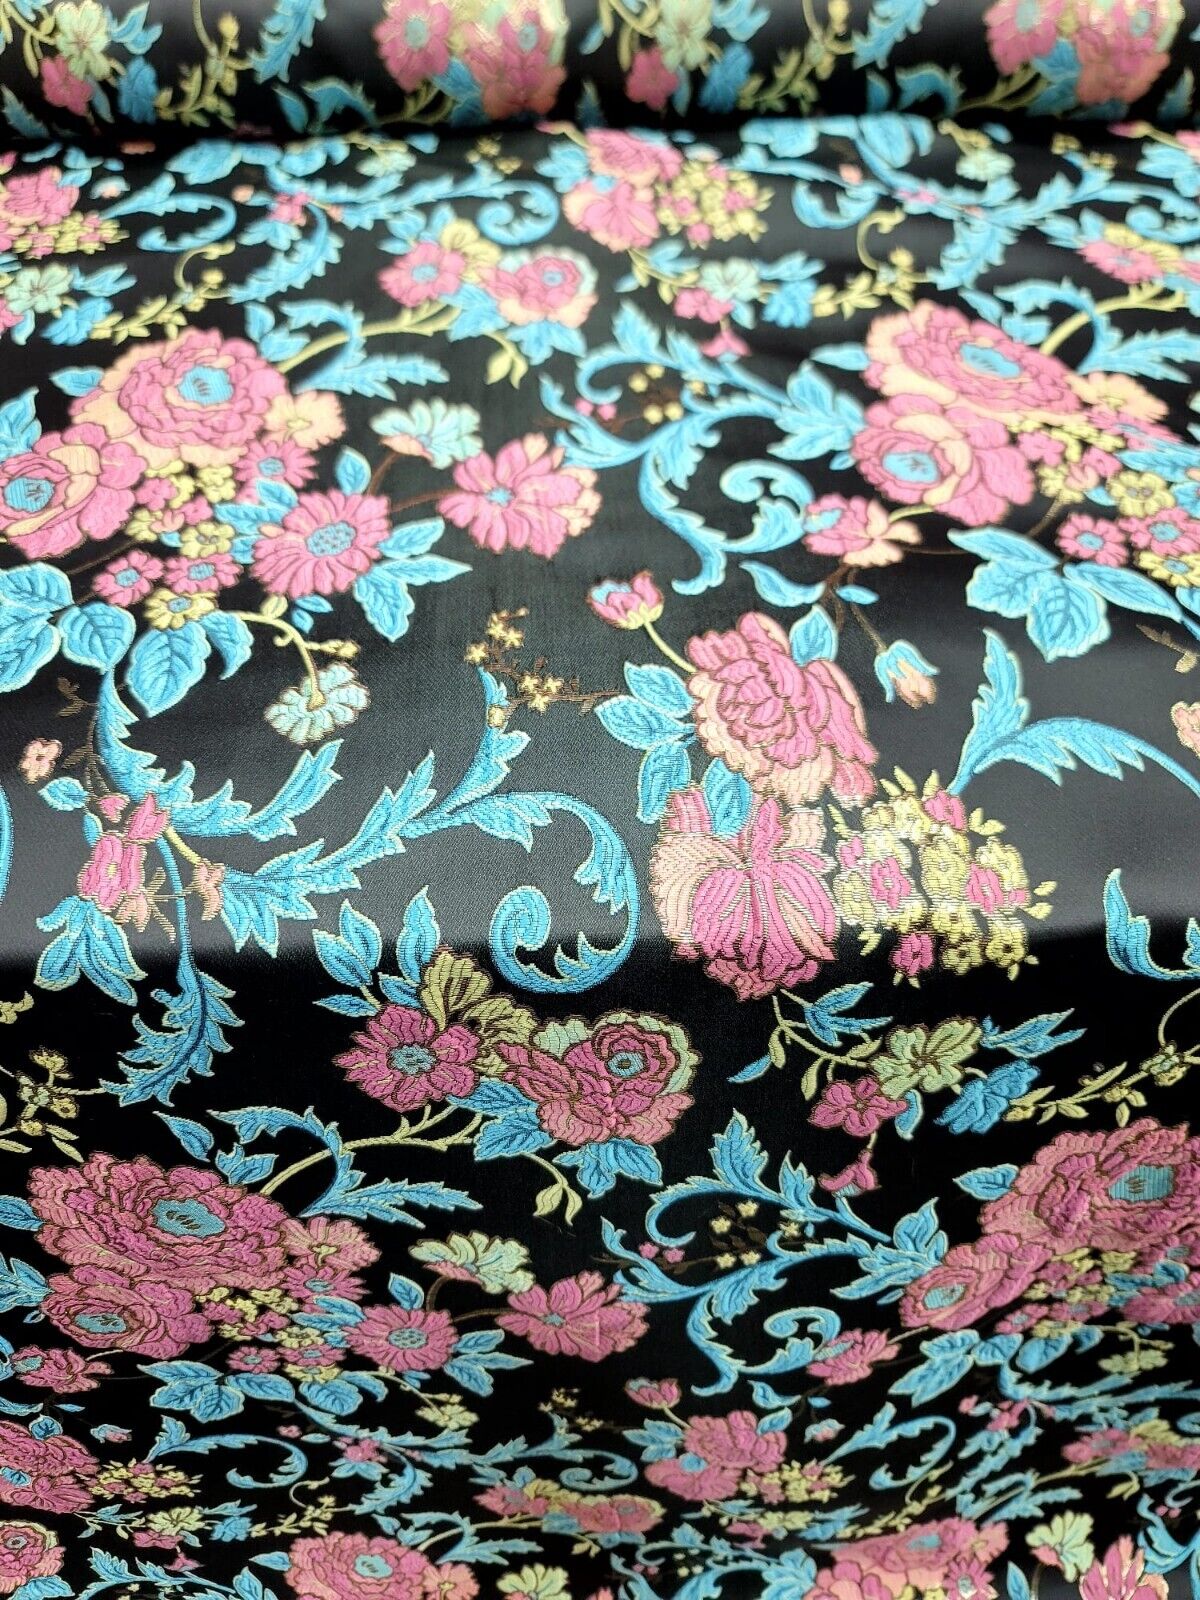 Brocade Multicolor Floral Turquoise Pink Black Jacquard Fabric By The Yard Dress